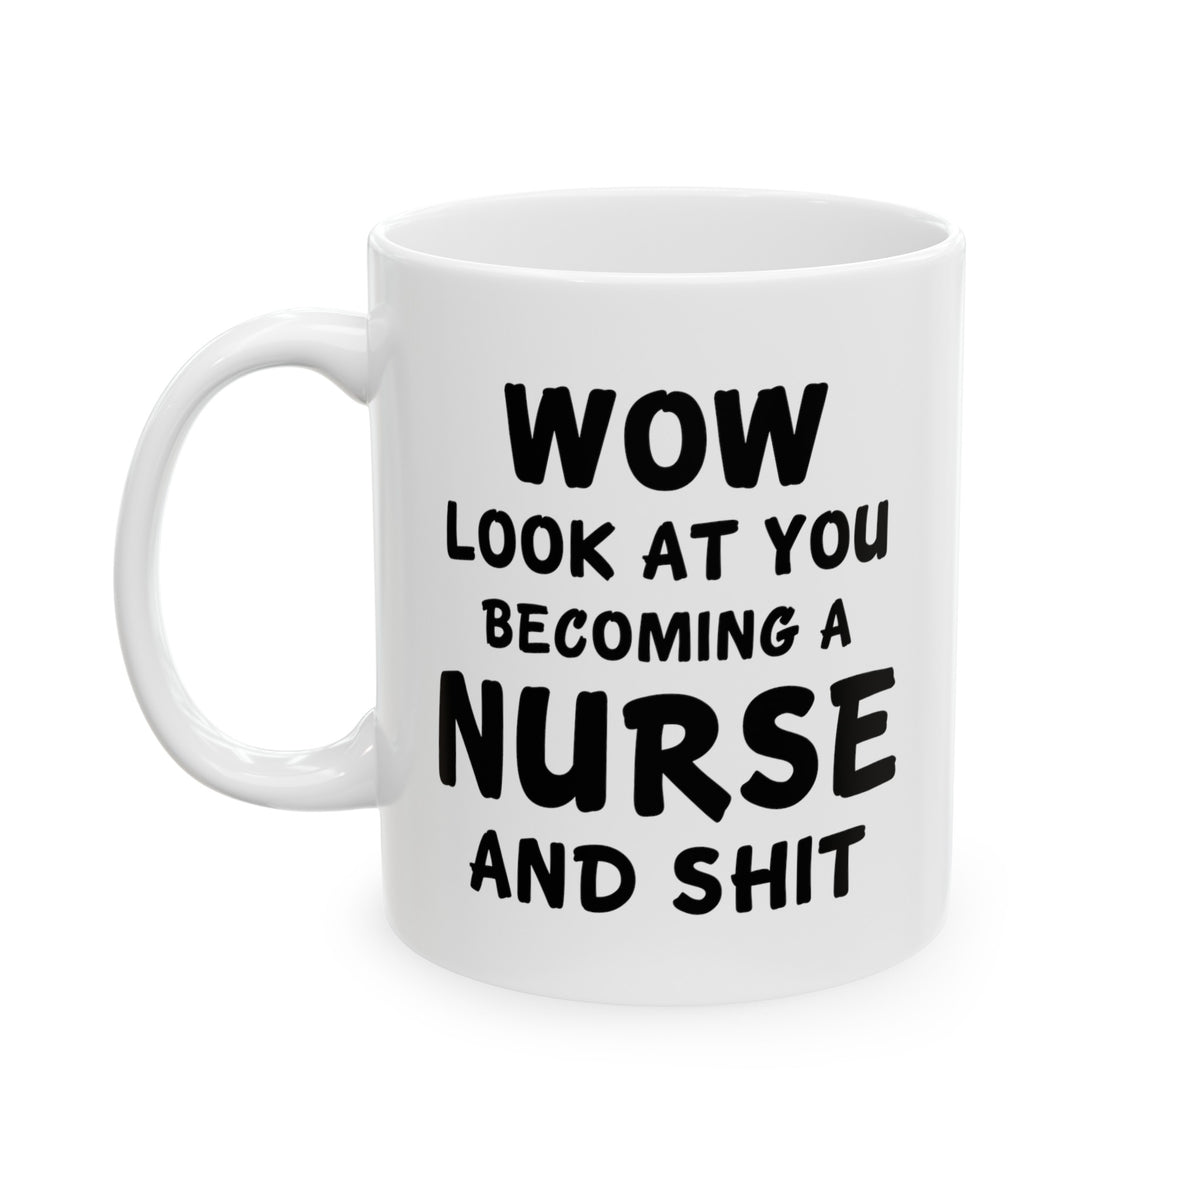 Funny Nurse Coffee Mug - Wow, Look at you becoming a Nurse and Shit Cup - Fun Birthday Gifts for Practitioner Registered Nursing Mom